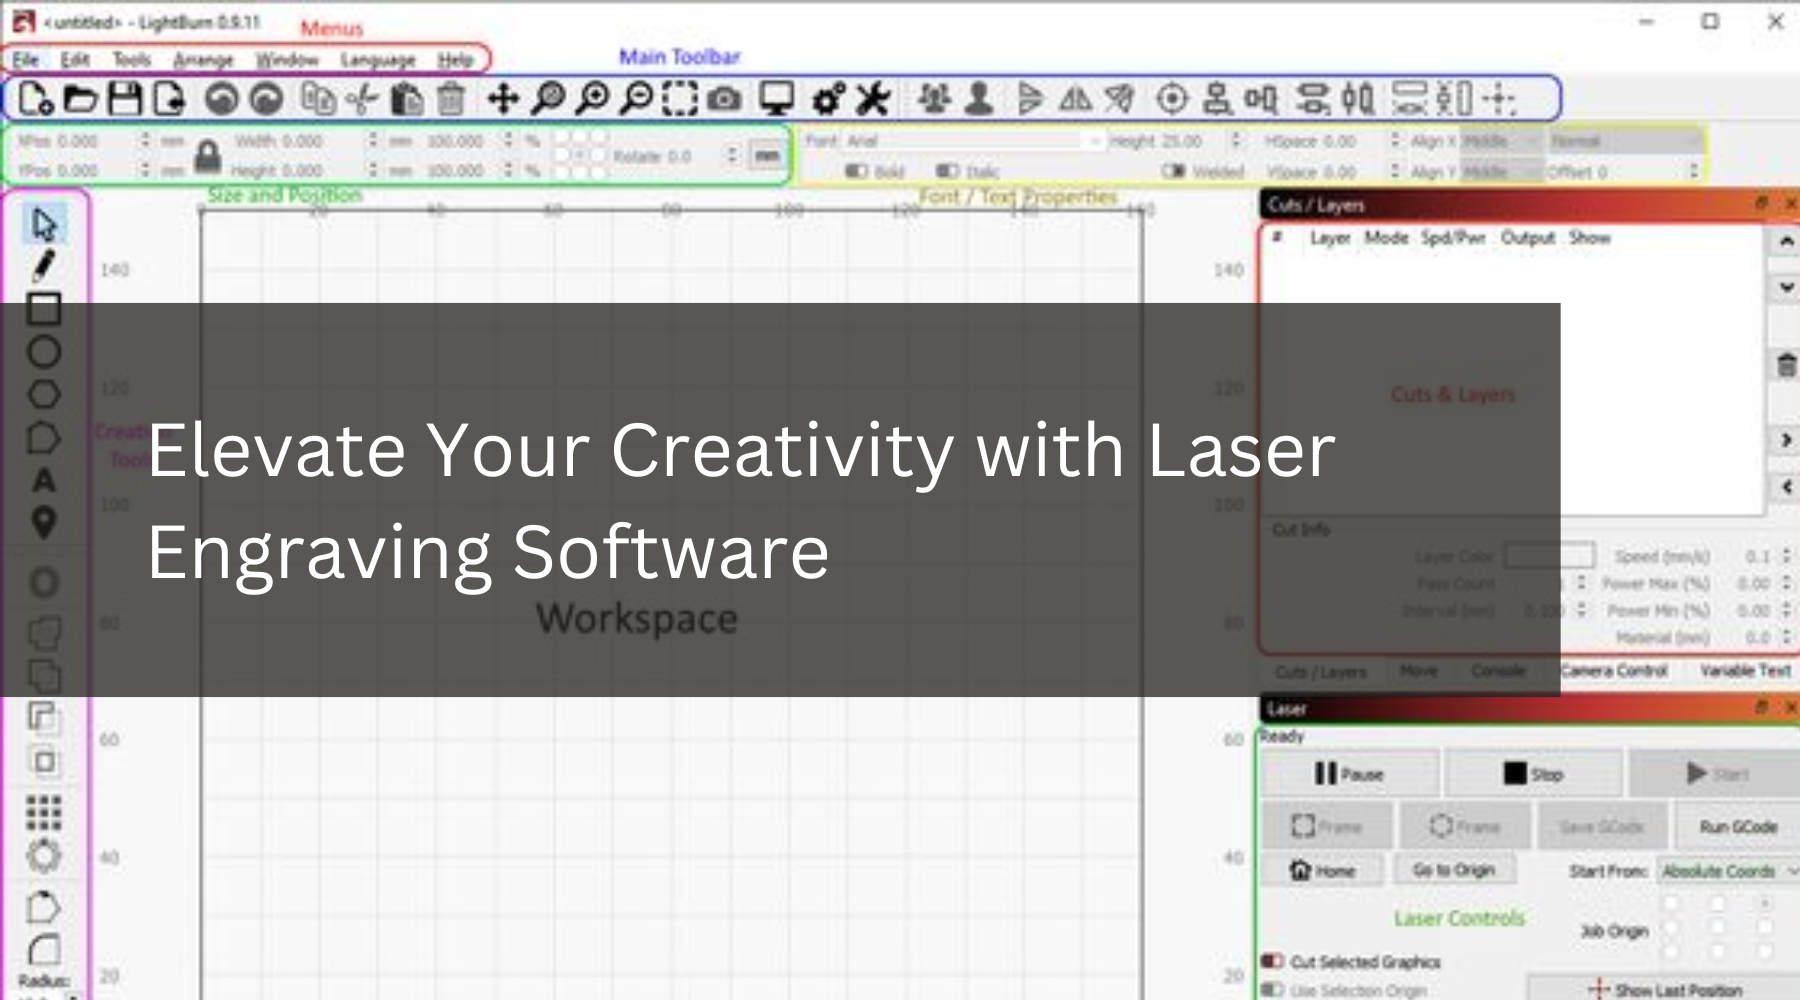 Elevate Your Creativity with Laser Engraving Software